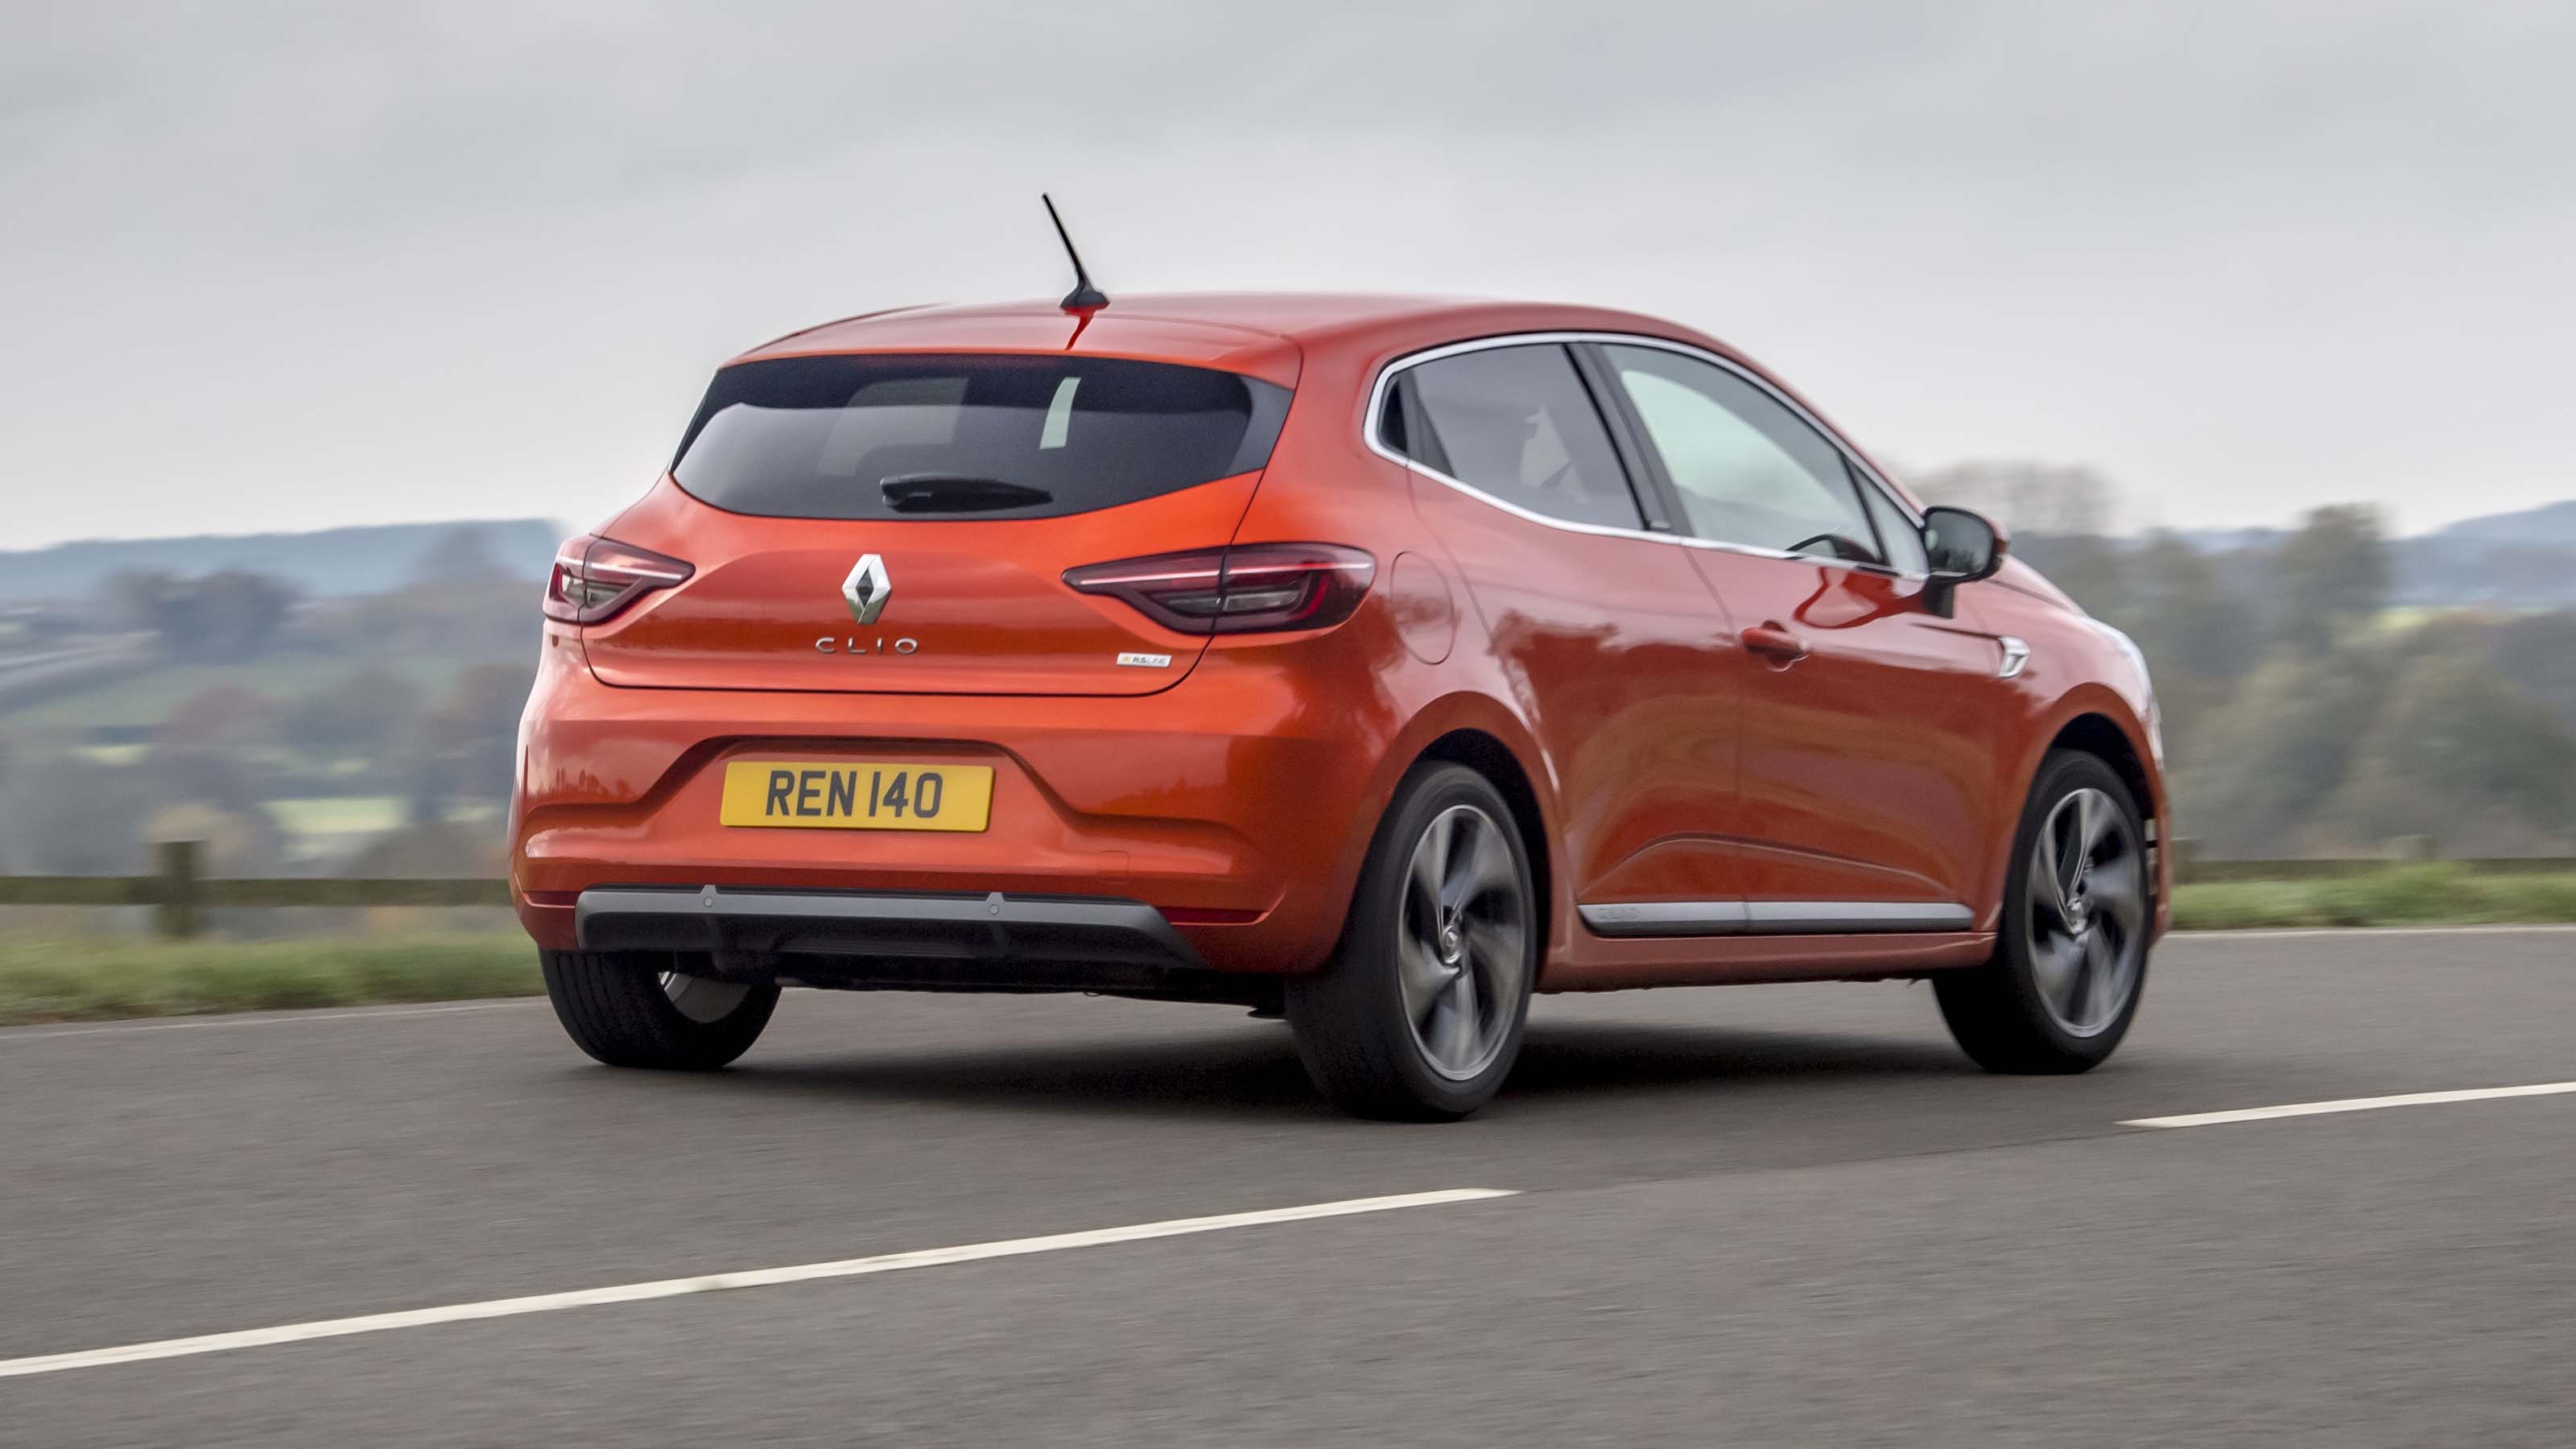 Renault Clio E-TECH hybrid running costs | DrivingElectric